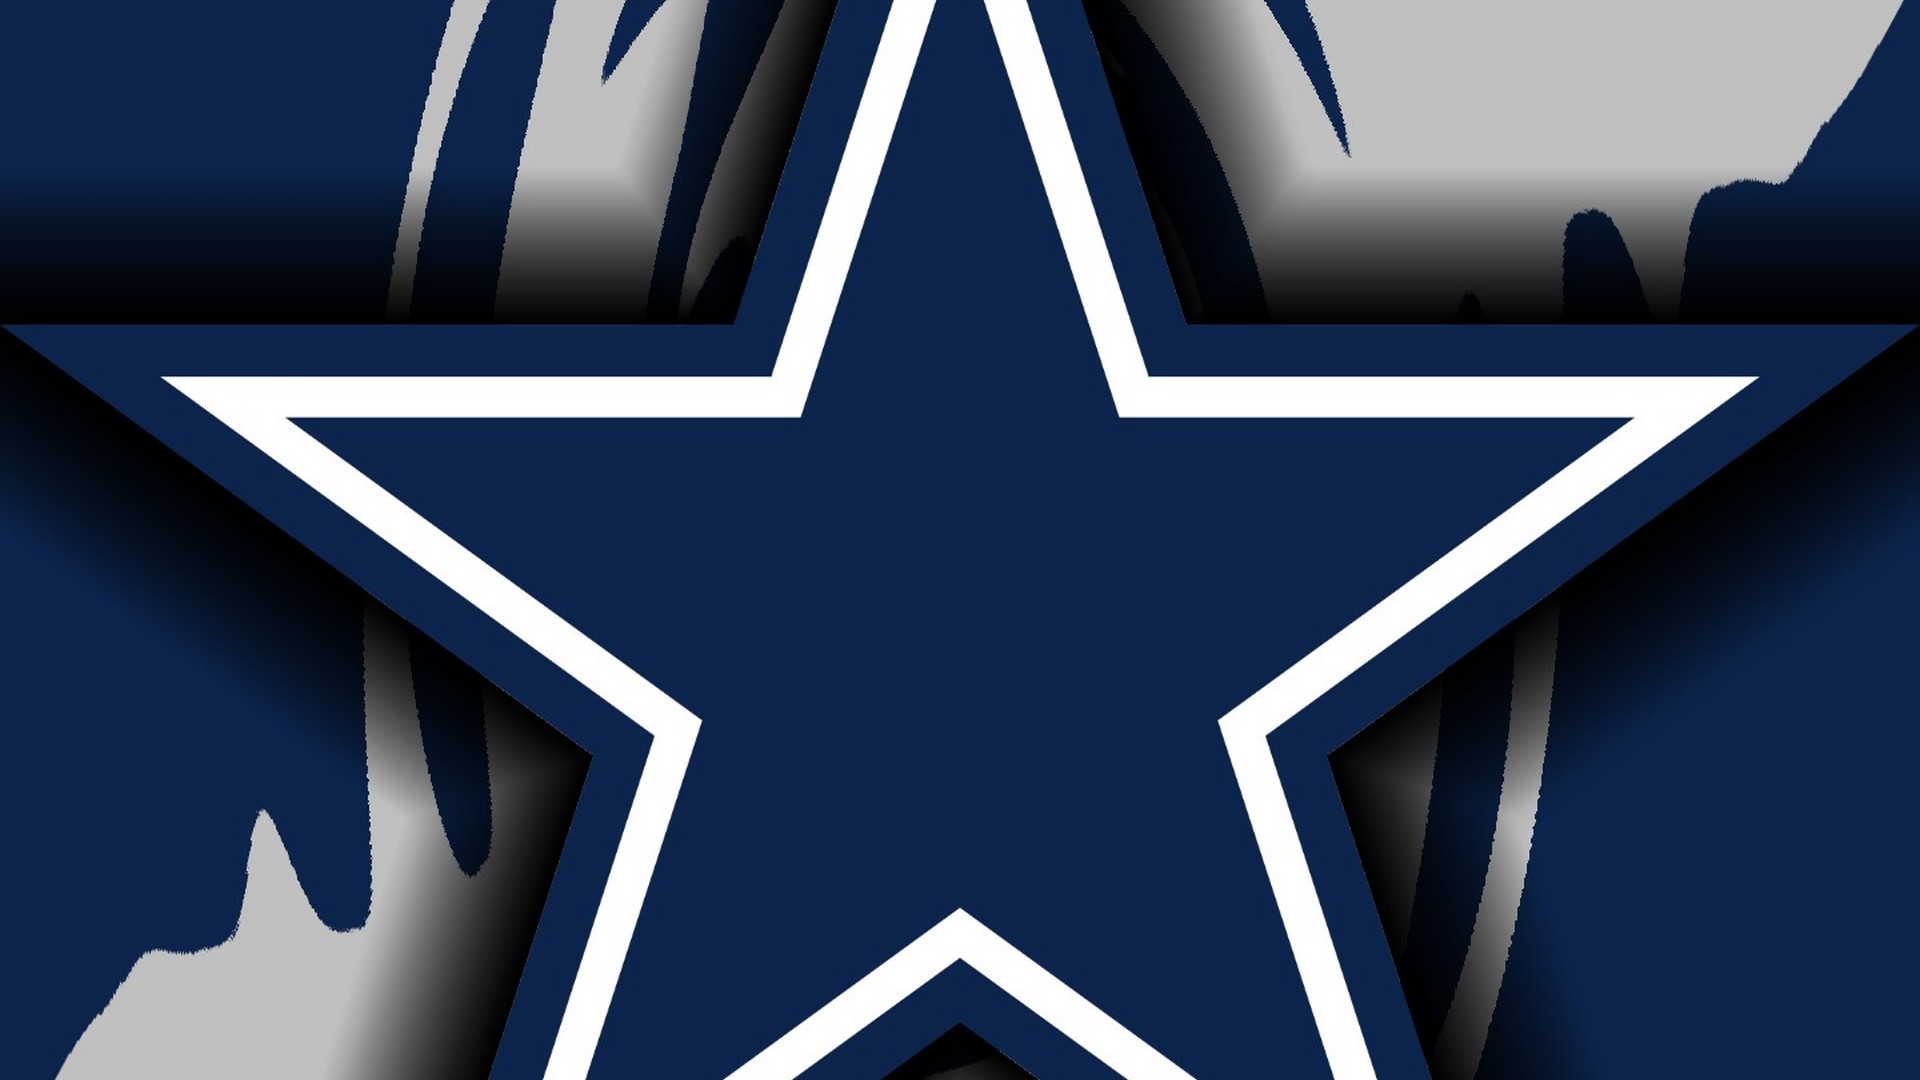 Wallpapers HD Dallas Cowboys With Resolution 1920X1080